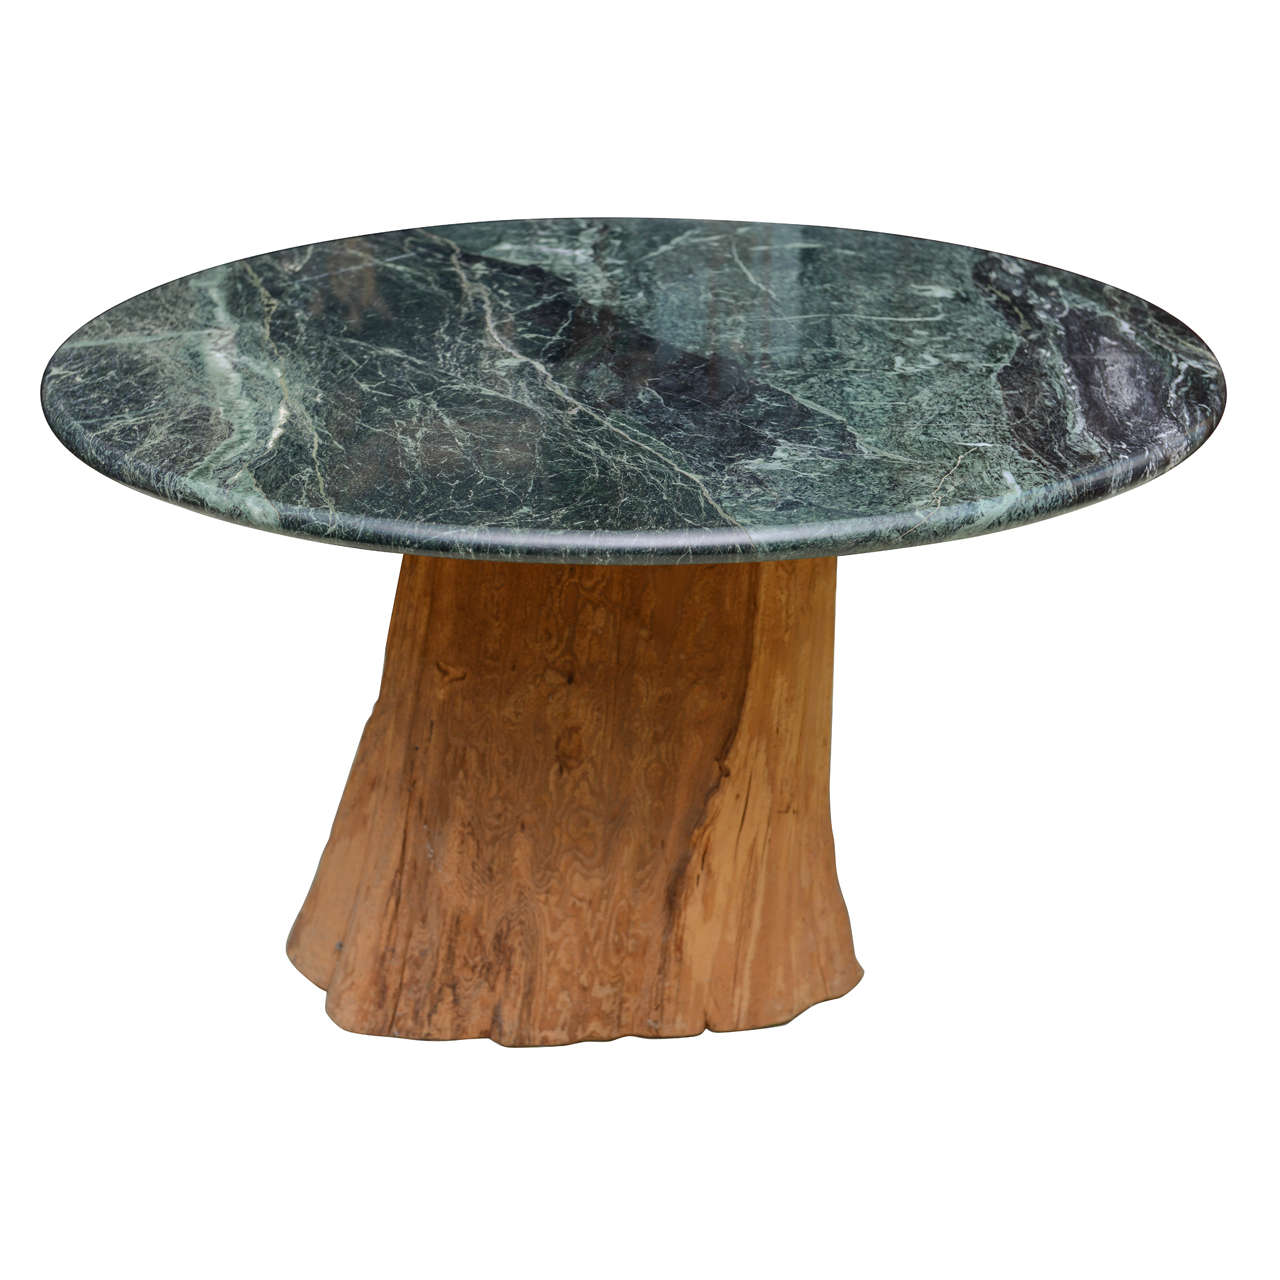 Chic Mid-Century Modern Dining Table, Michael Taylor designed this Classic beauty. The 1970s natural sandblasted petrified wood tree trunk table from the south west desert exemplifies an early entry into organic and environmental design. 
Vintage